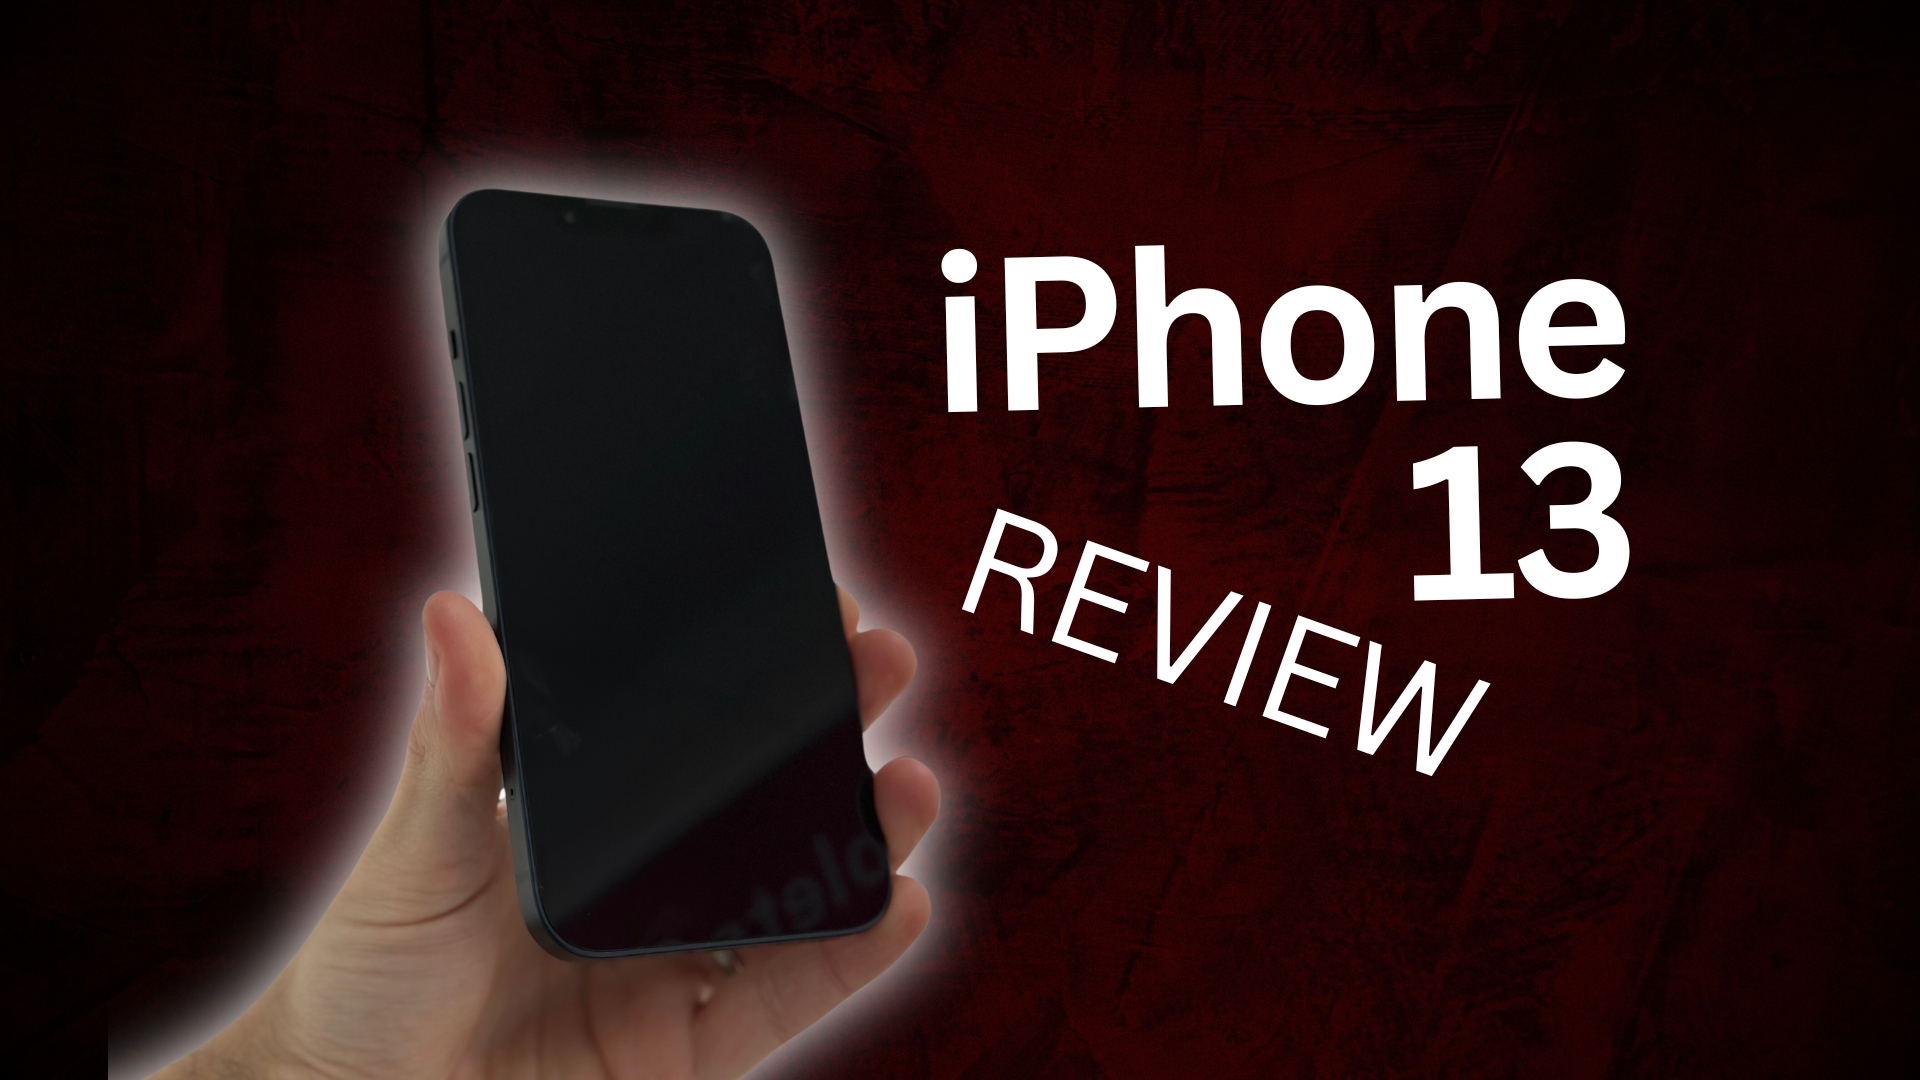 Iphone 13 review